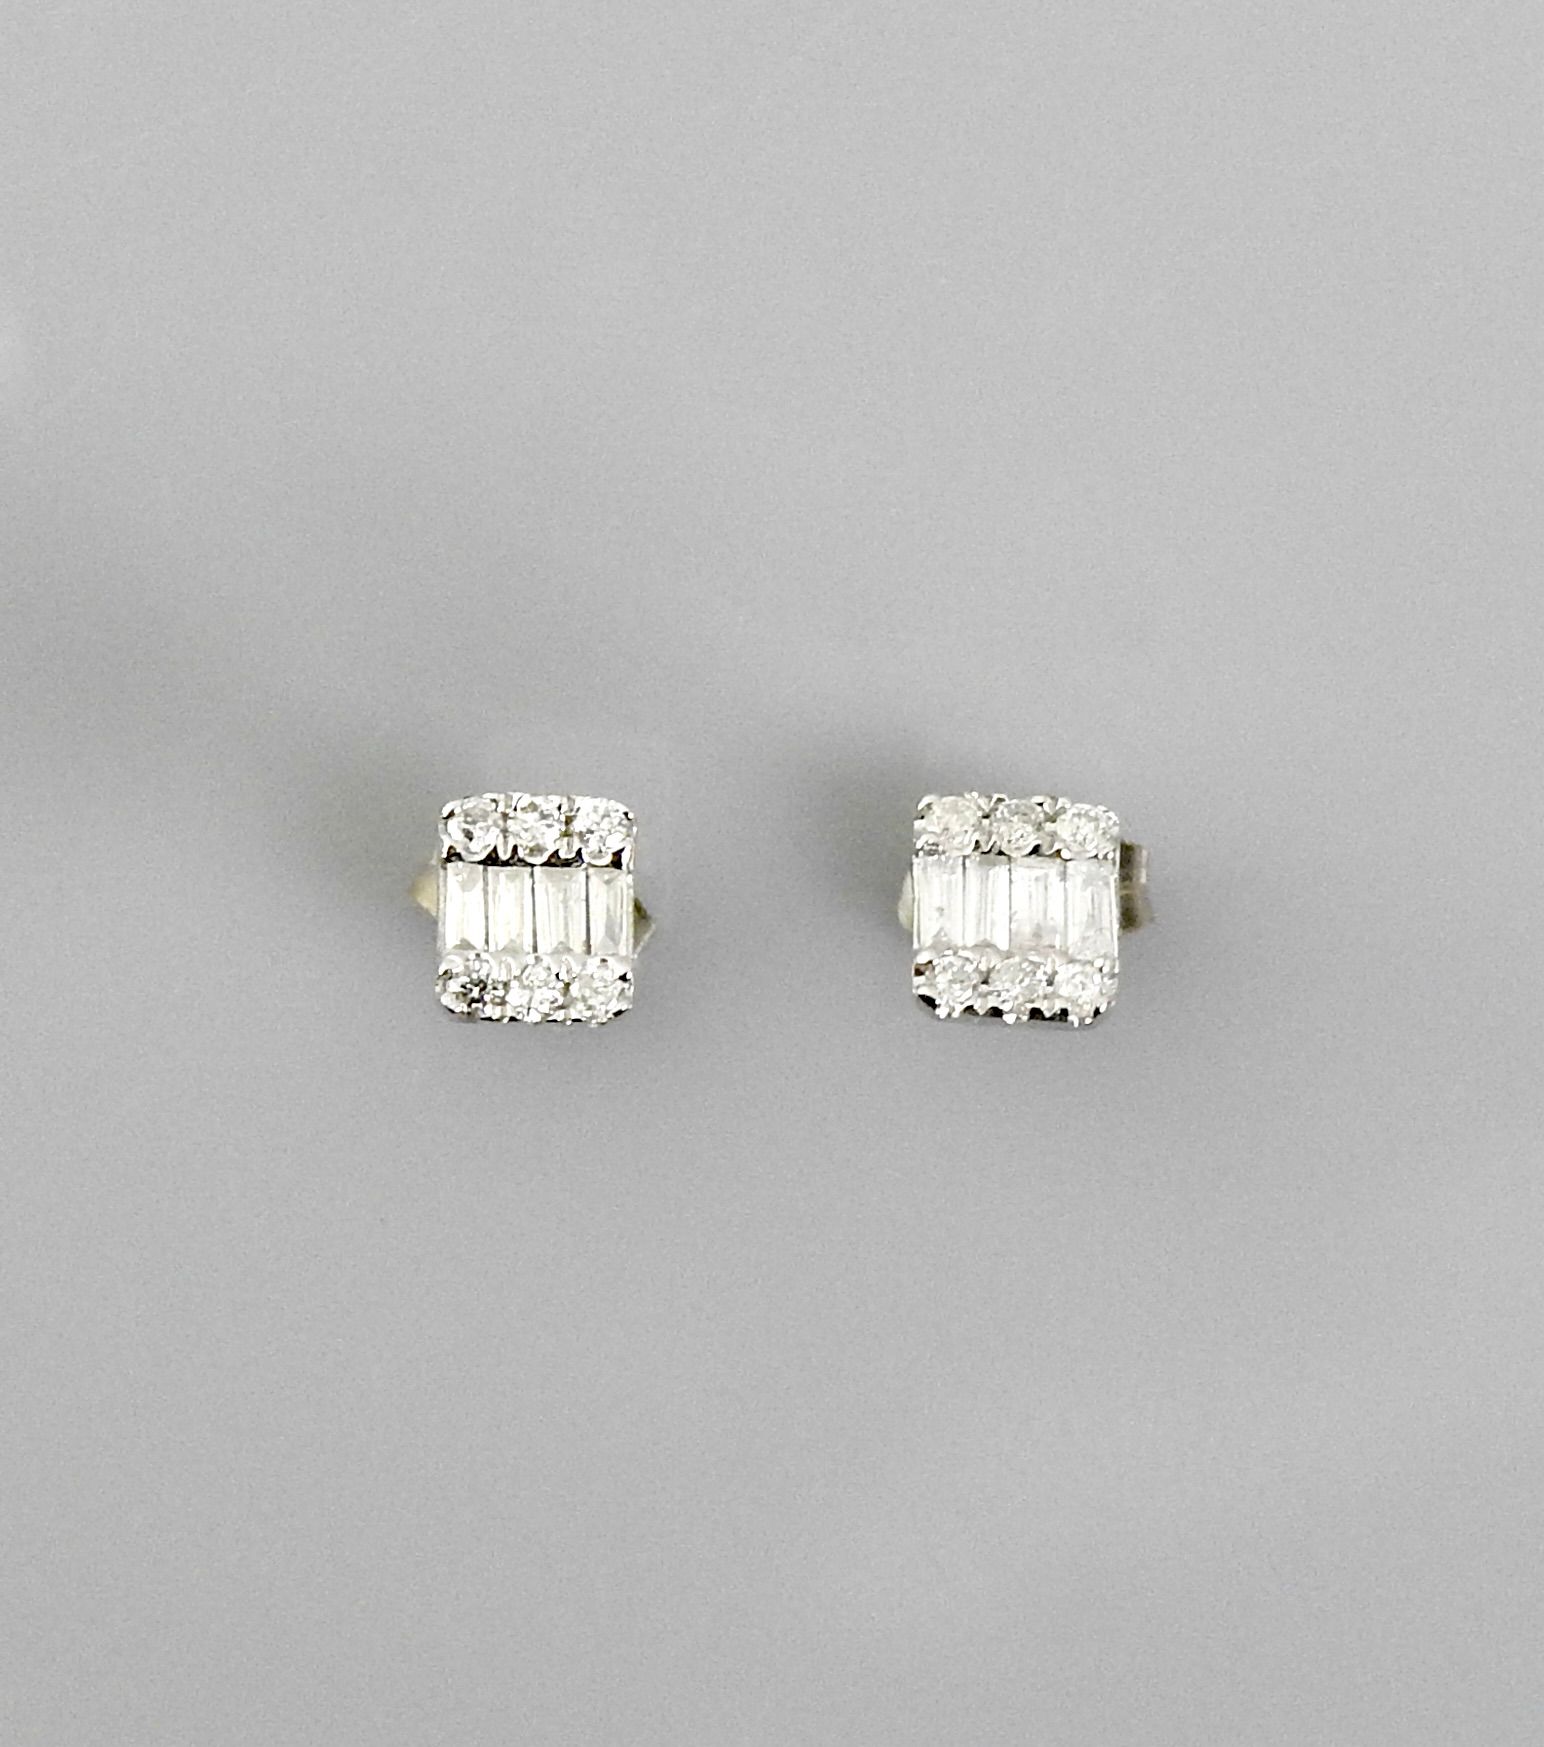 Null Square earrings in white gold, 750 MM, covered with baguette-cut and brilli&hellip;